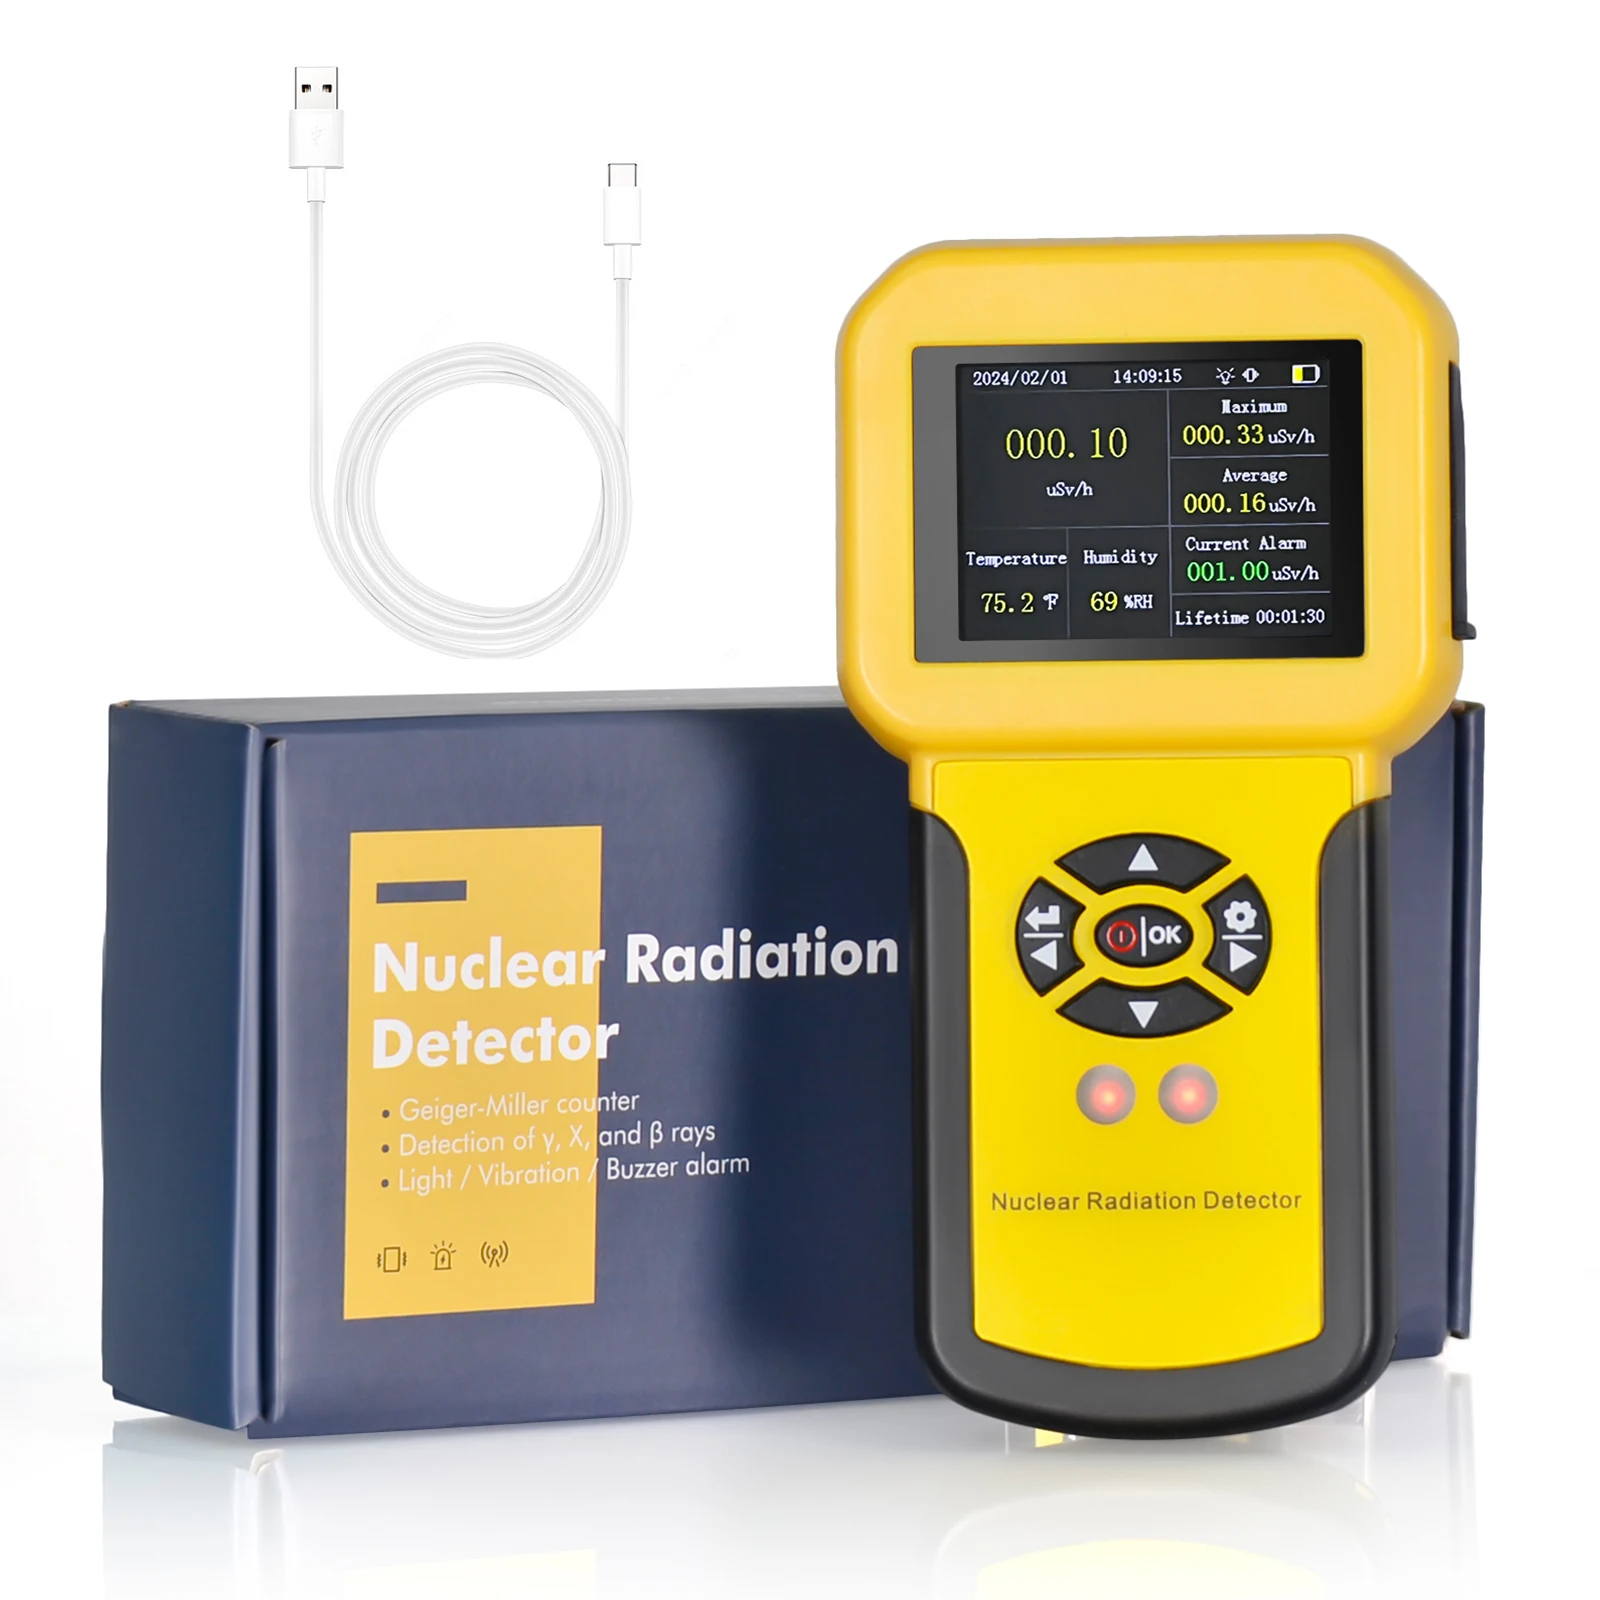 

HoldPeak Nuclear Radiation Detector Geiger Counter X-ray γ-ray β-ray Detector Marble Radioactivity Tester Personal Dosimeter